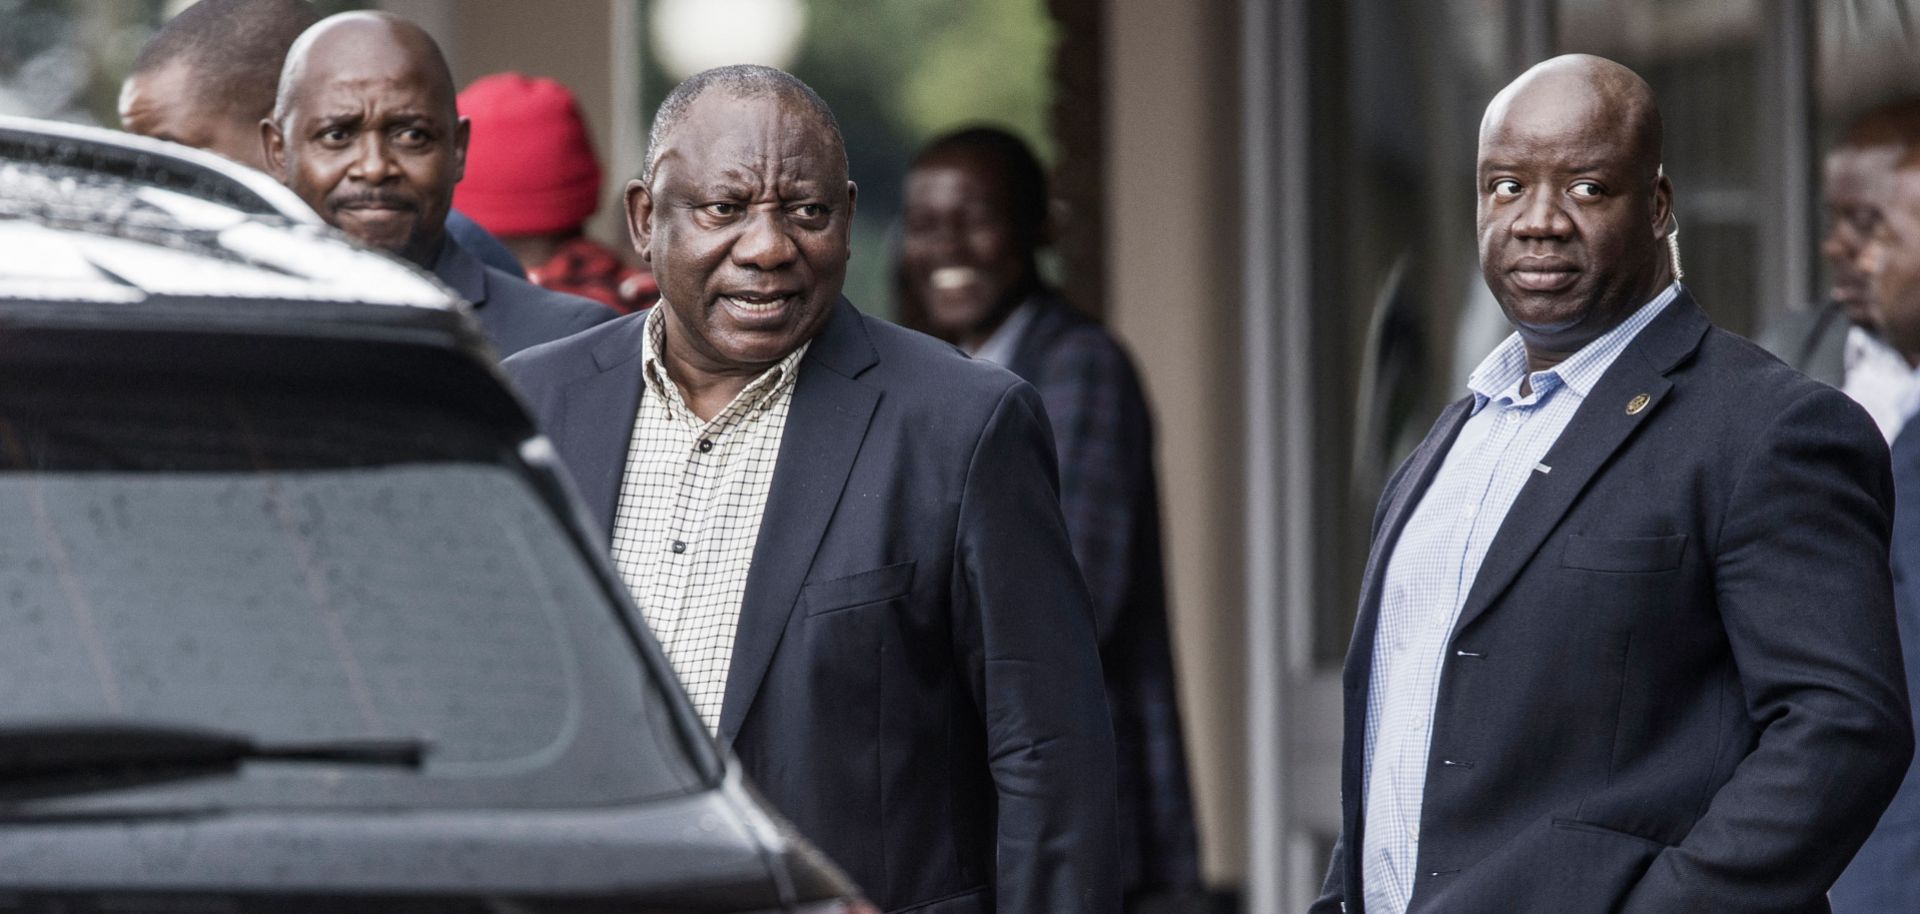 South African President Cyril Ramaphosa (center) leaves an ANC national executive committee meeting in Johannesburg on Dec. 5, 2022.